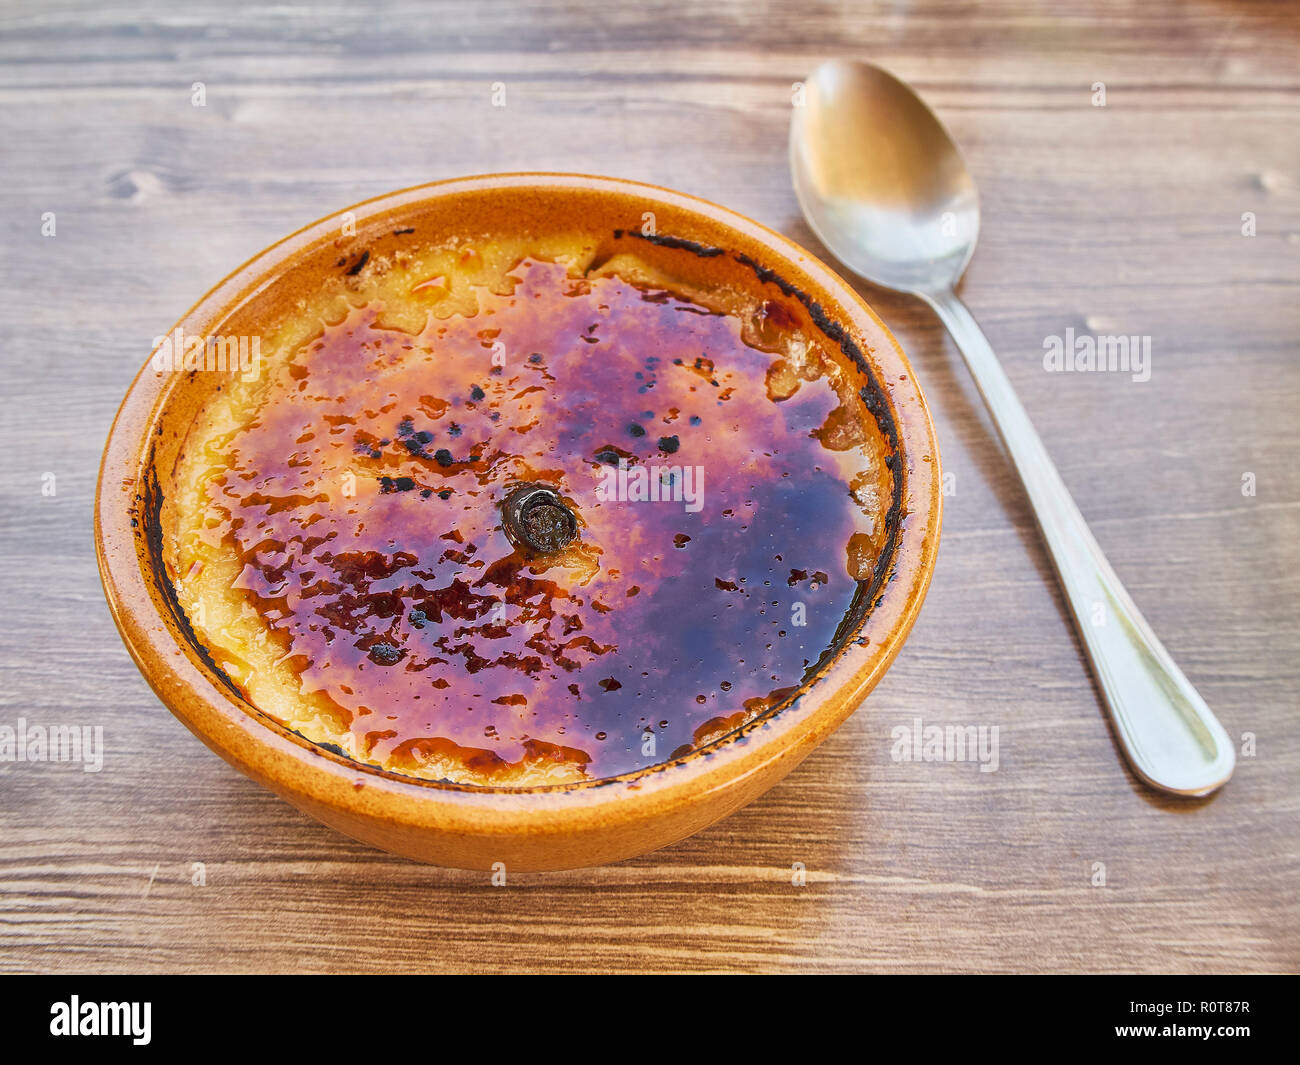 Crema Catalana or Creme Brulee in rustic bowl, typical taberna or bistro presentation with a cinnamon stick in the middle. Stock Photo